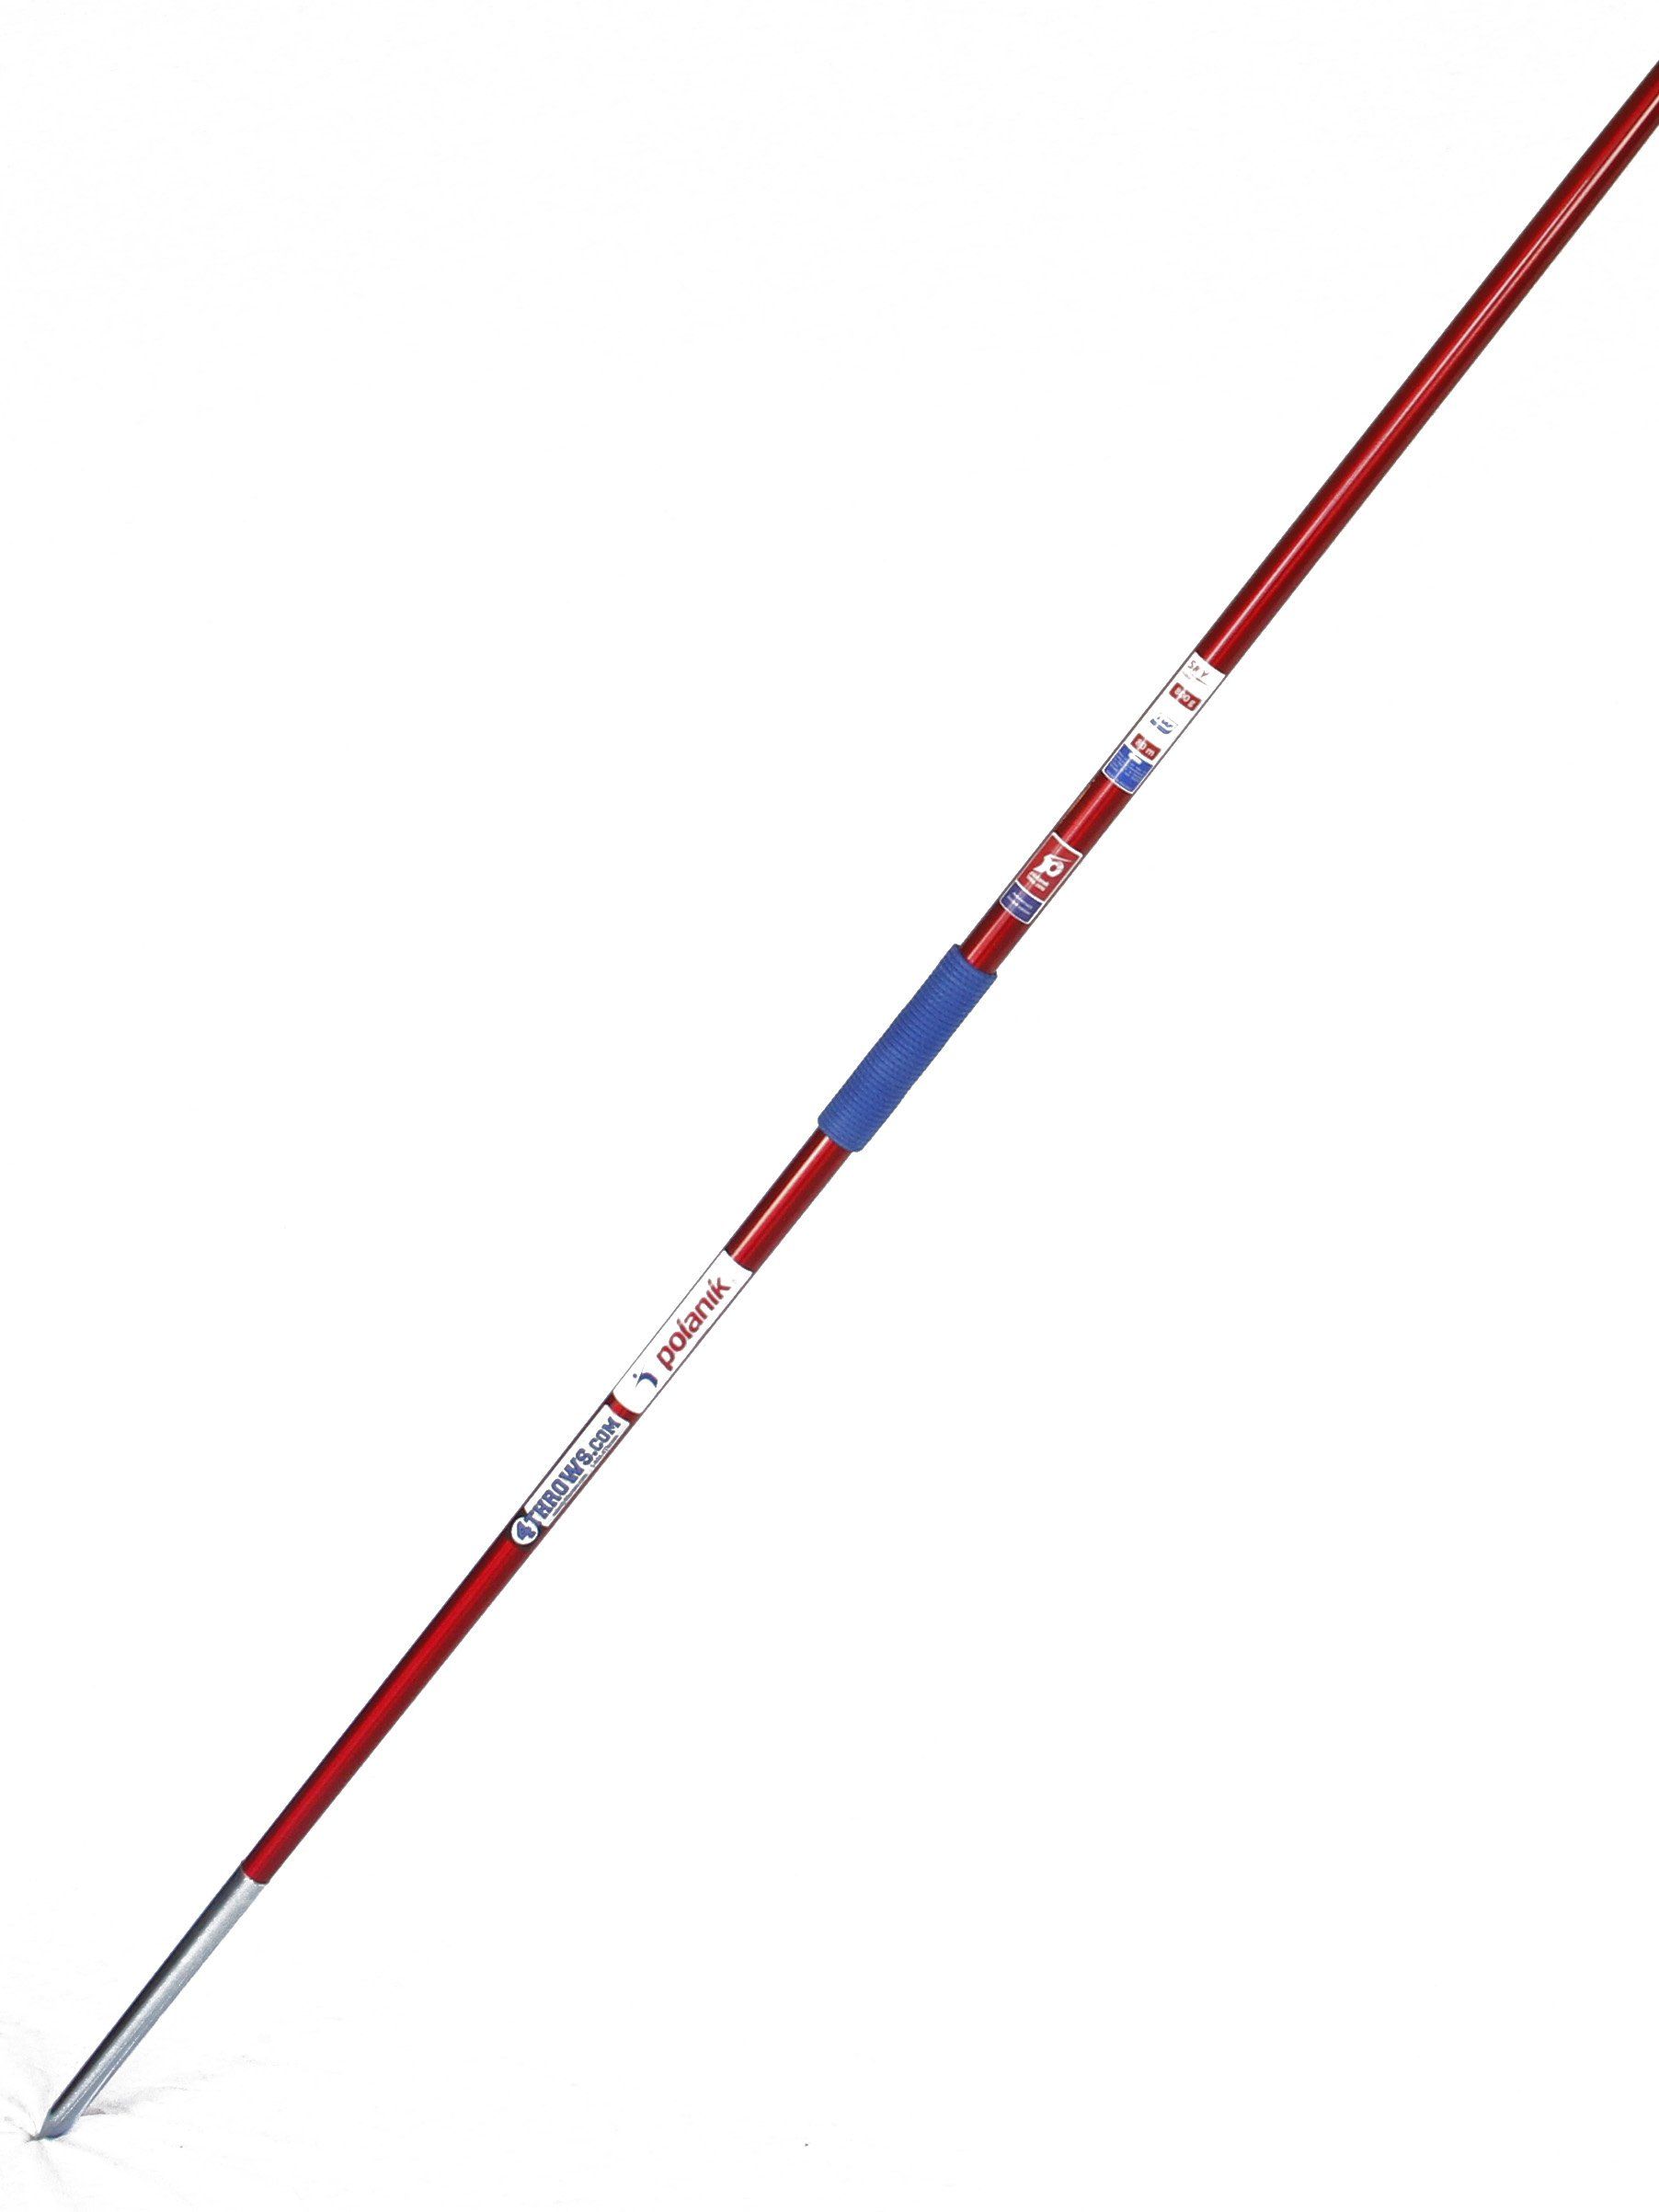 Polanik SkyChallenger 600g - Red Javelin- CLOSE OUT